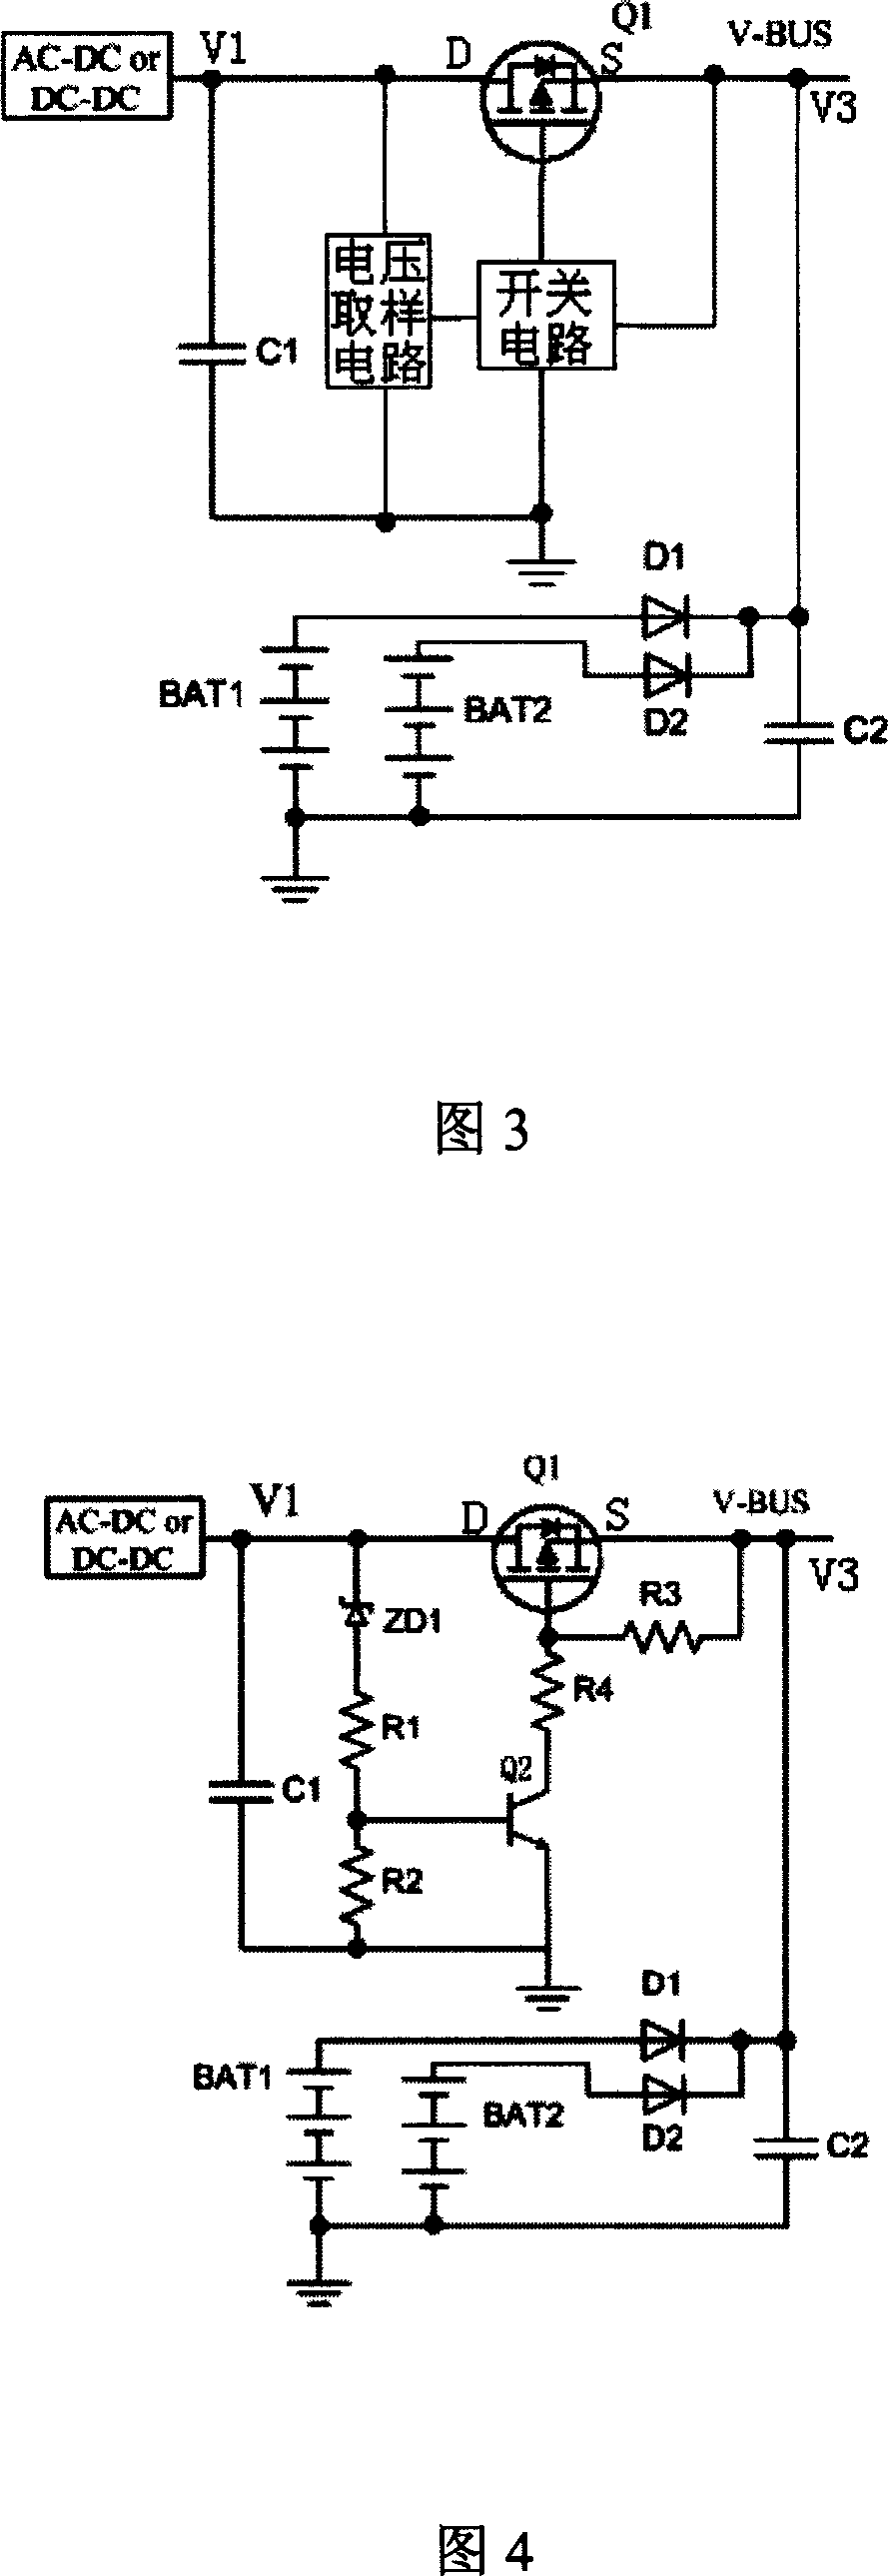 Power supply system and switch circuit, switch method of main power source and backup battery